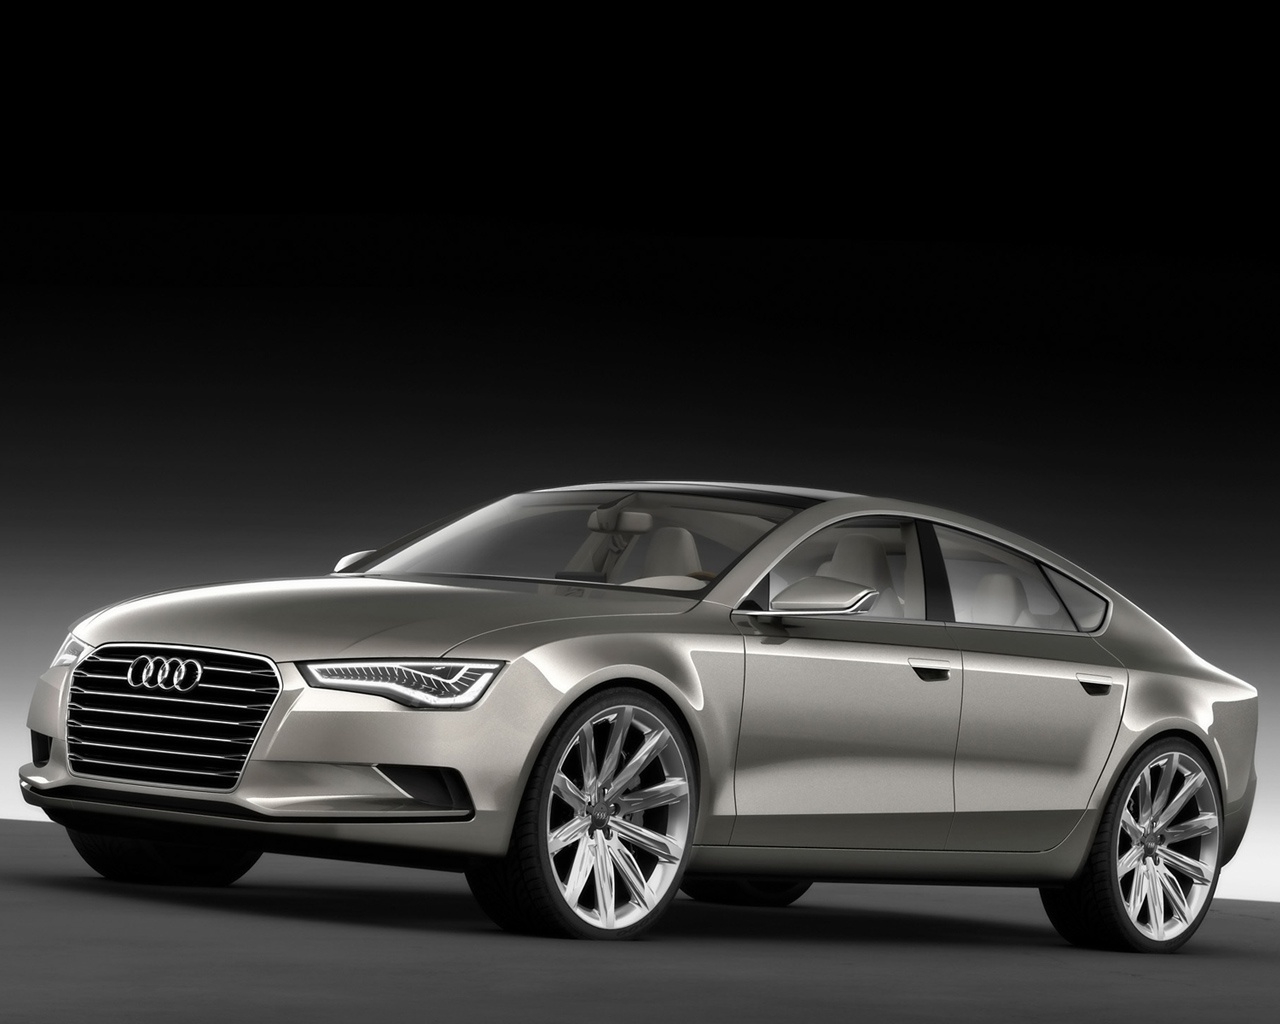 2009 Audi Sportback Concept - Front And Side for 1280 x 1024 resolution